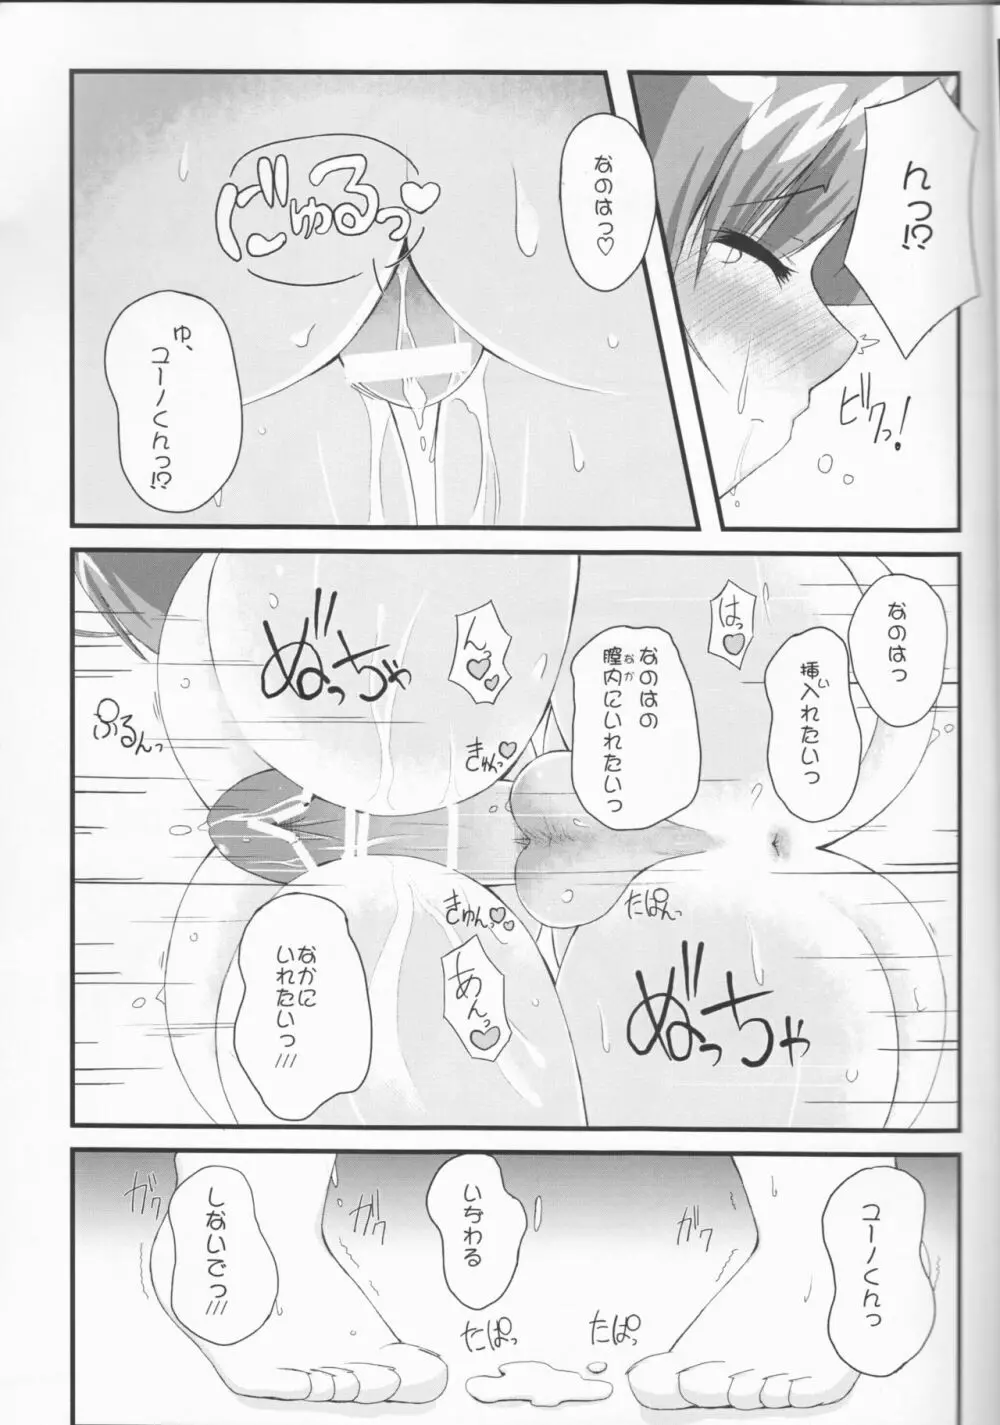 Pure Heart 11th Episode ～Dense Time～ - page4